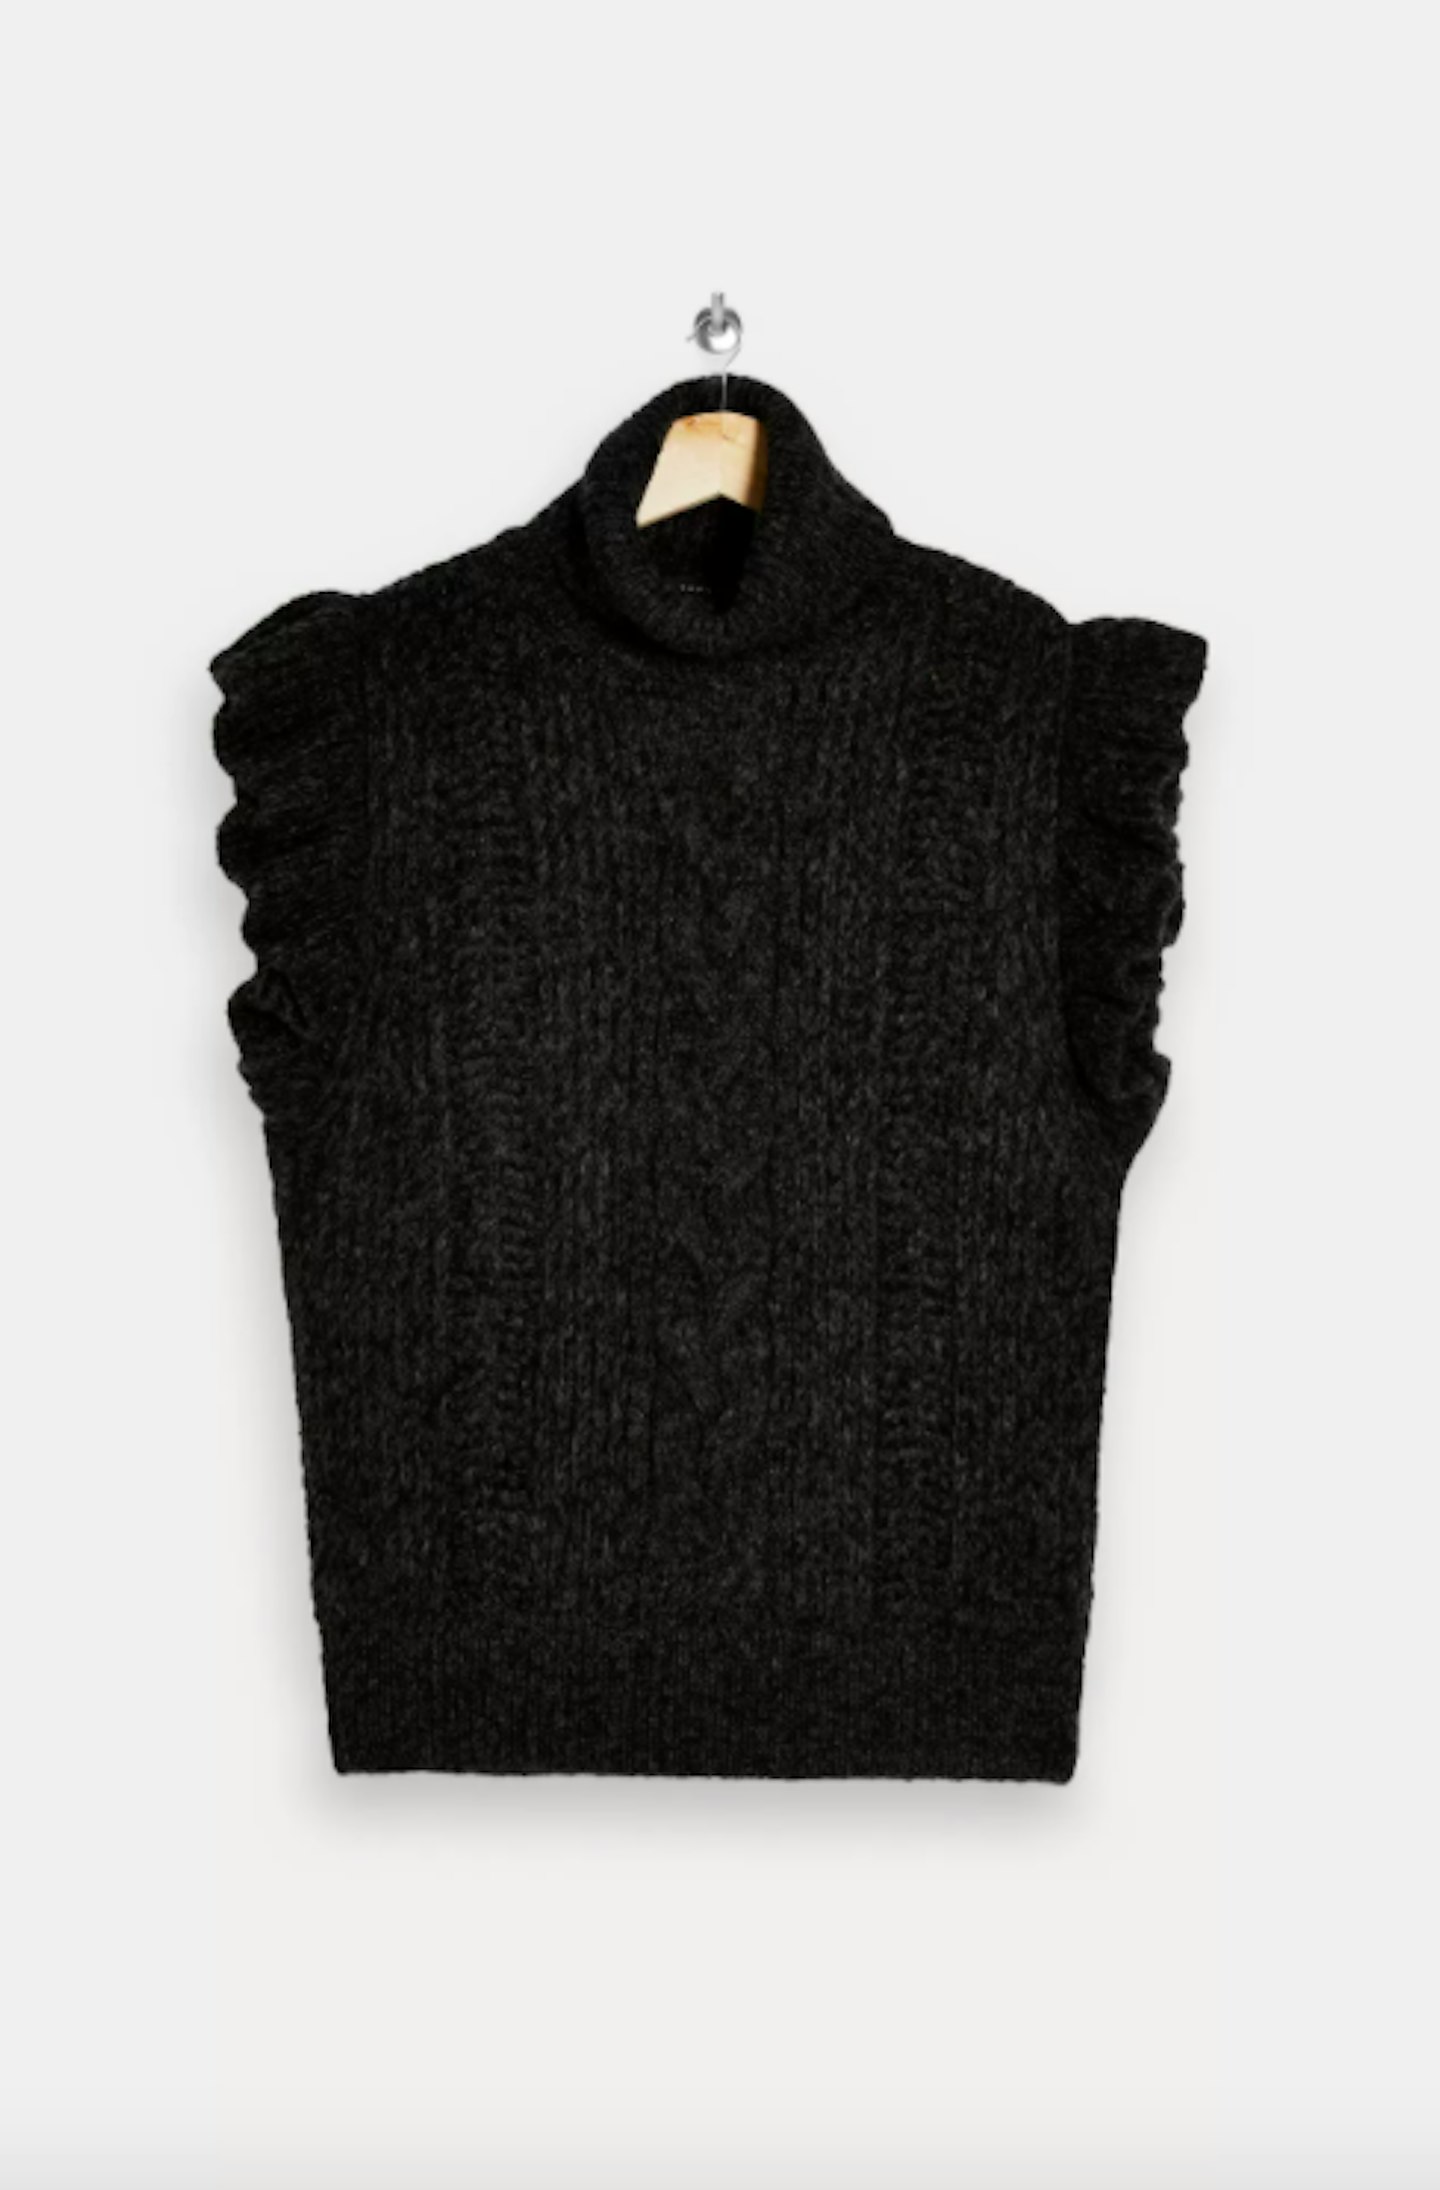 Topshop, Idol Charcoal Grey Frill Cable Knitted Tank, £35.99